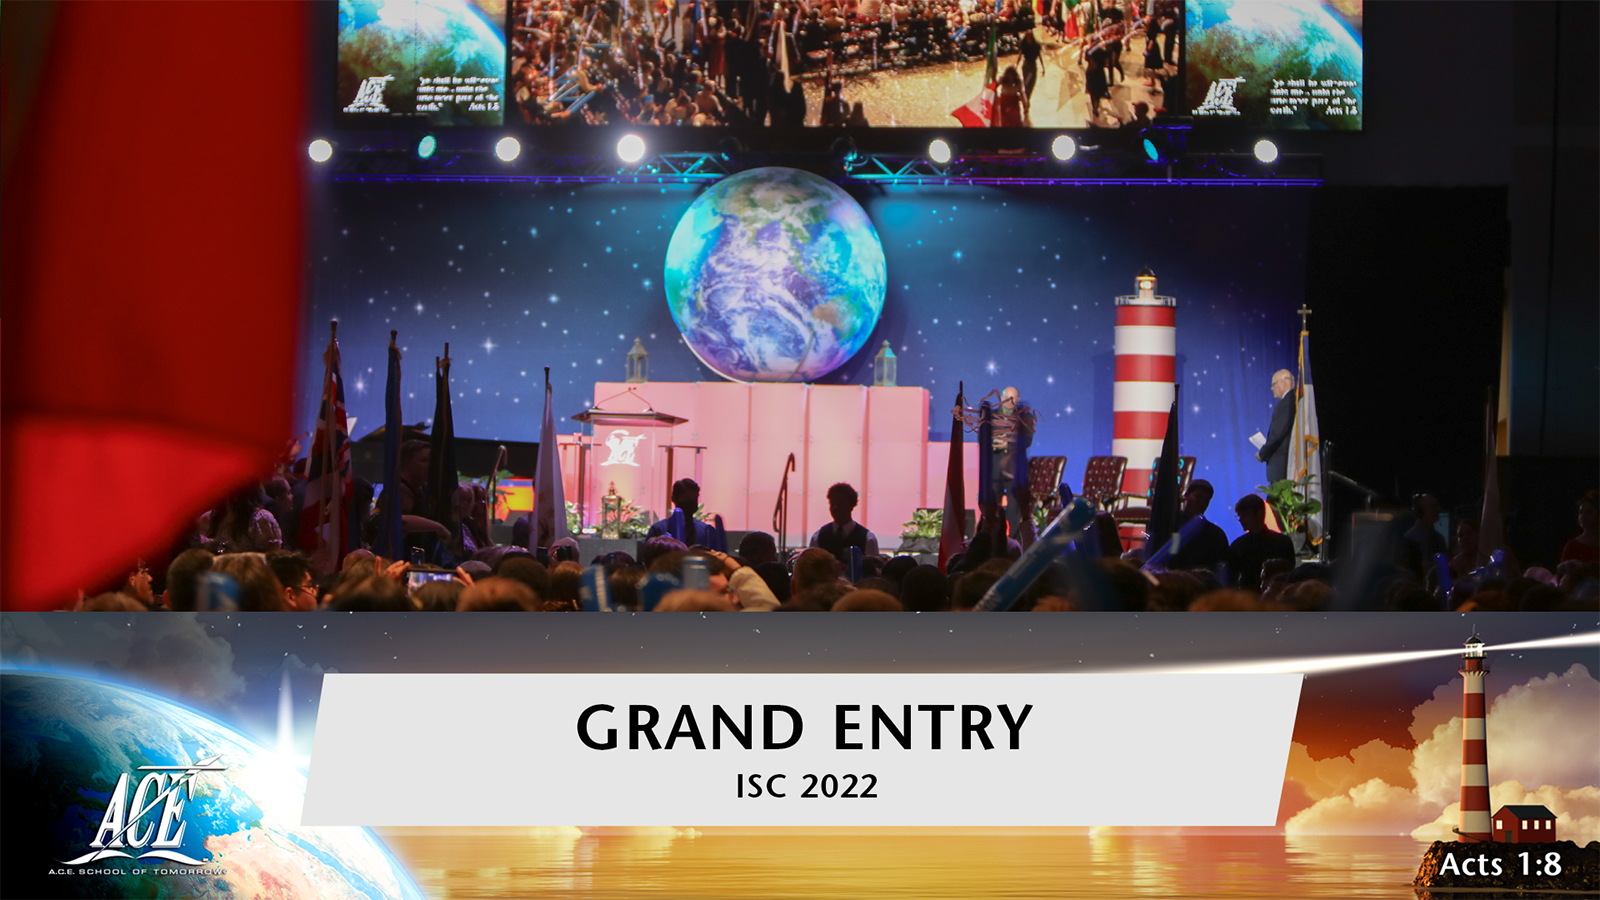 Grand Entry - ISC 2022